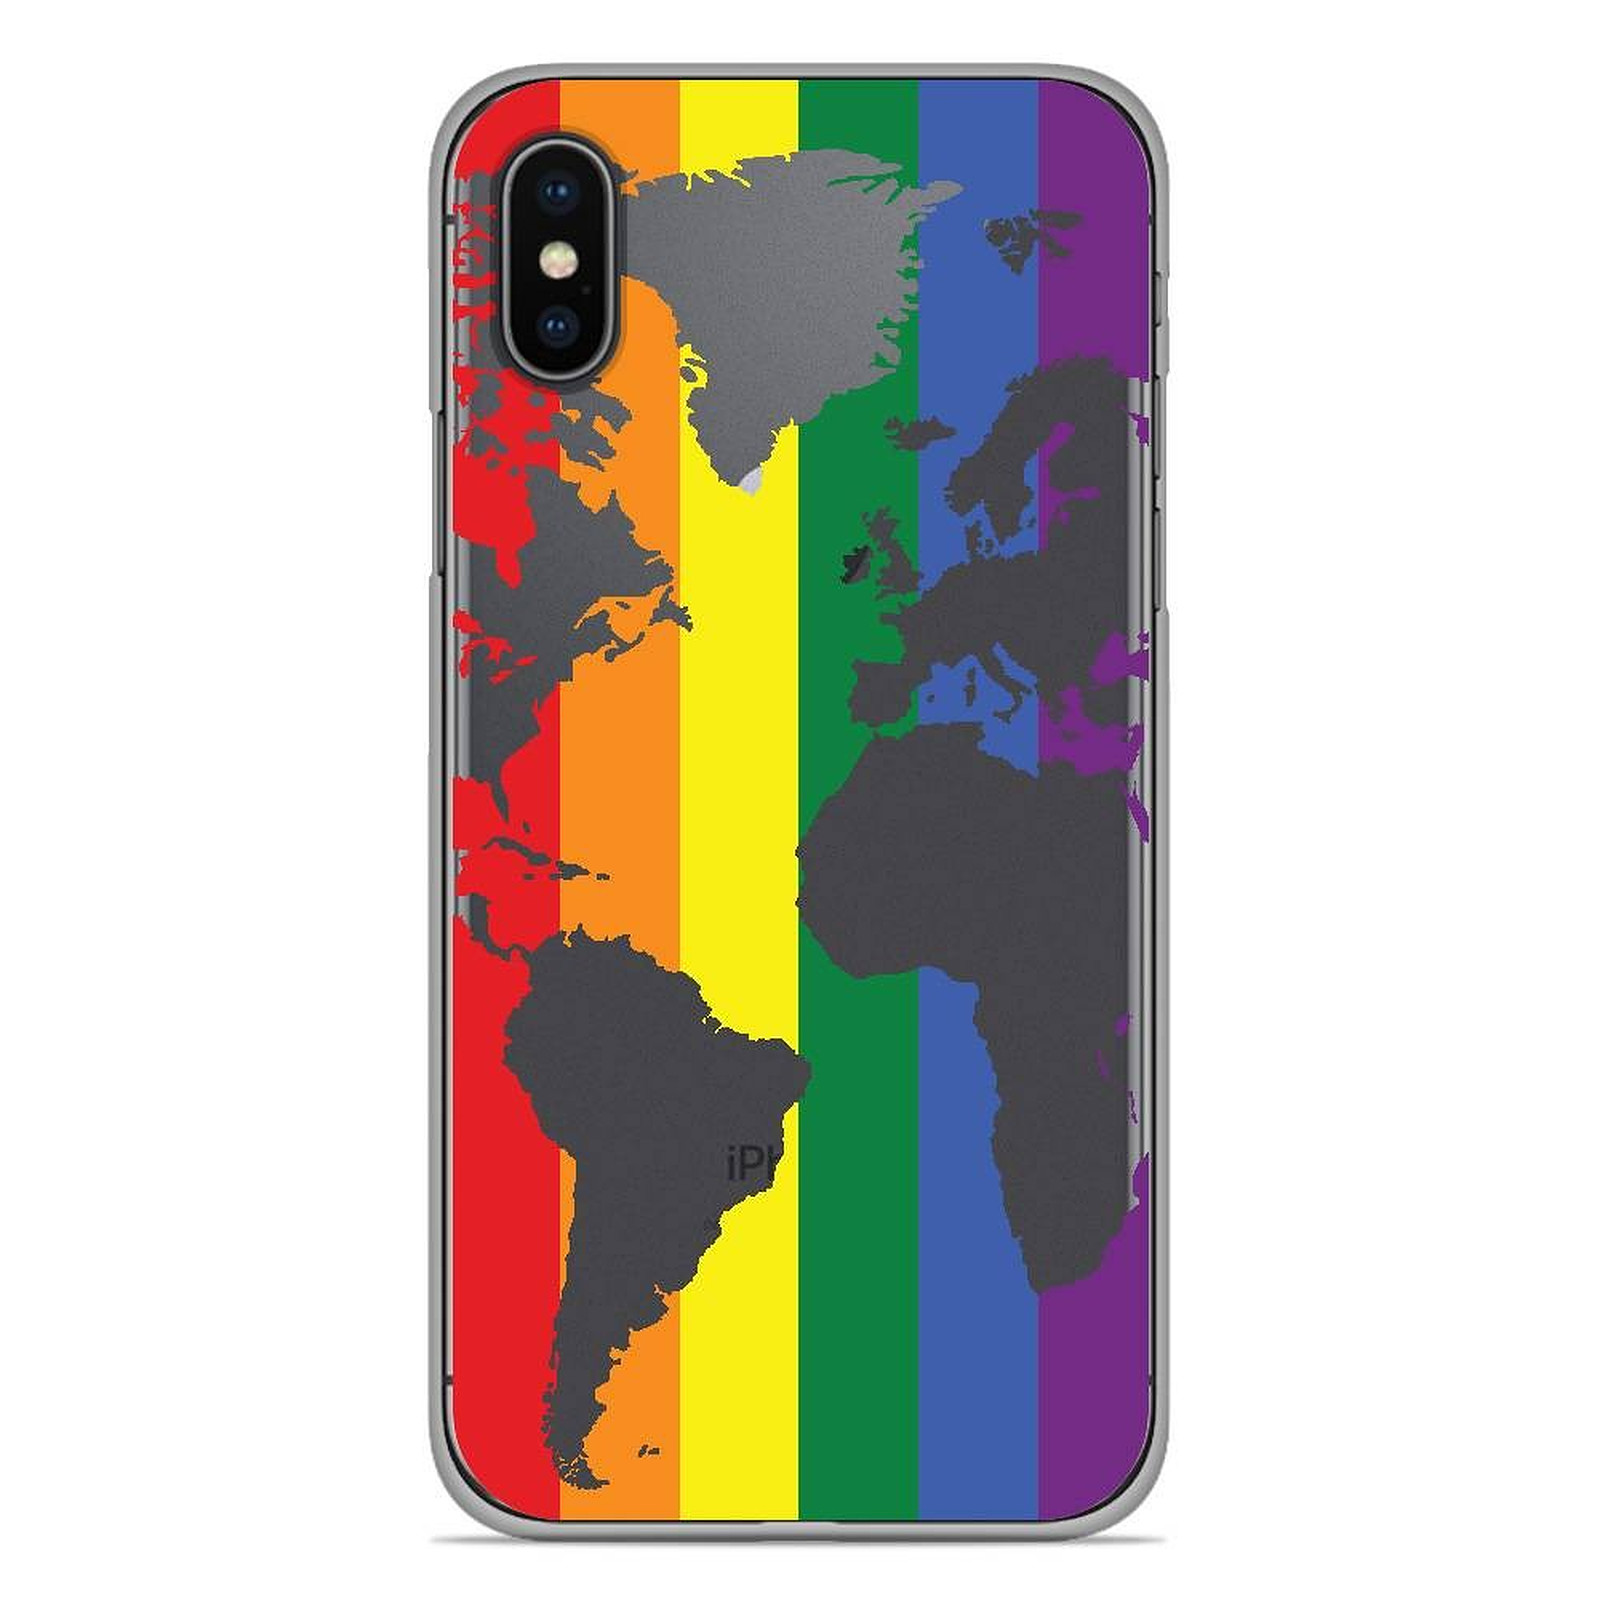 1001 Coques Coque silicone gel Apple iPhone XS Max motif Map LGBT - Coque telephone 1001Coques